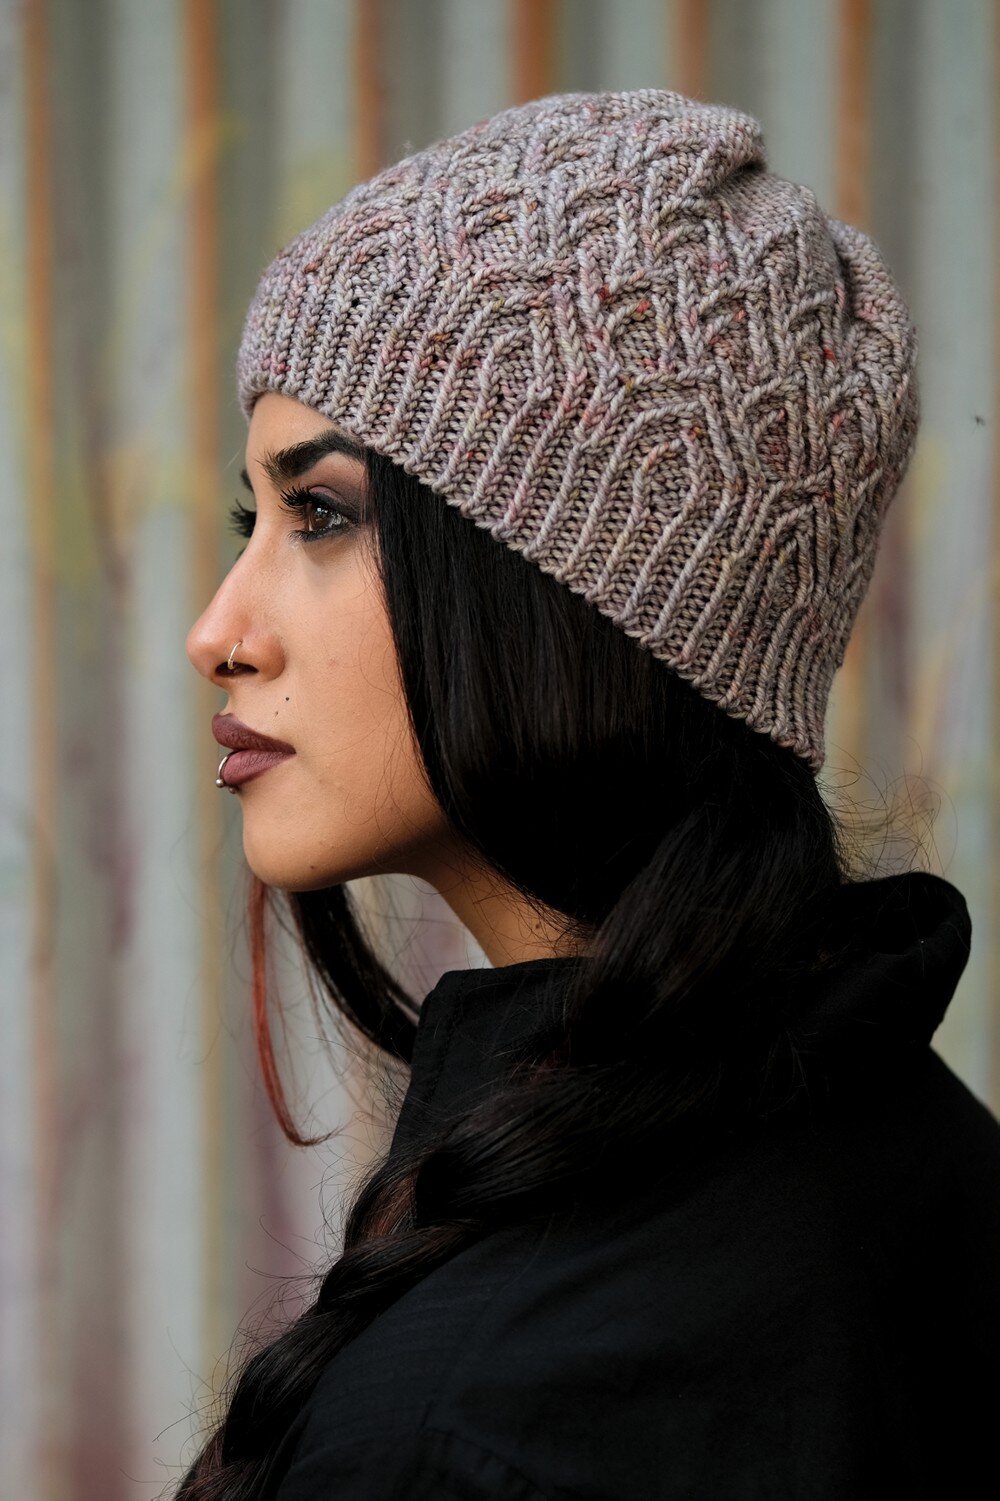 Principessa hand knitting pattern for worsted weight yarn